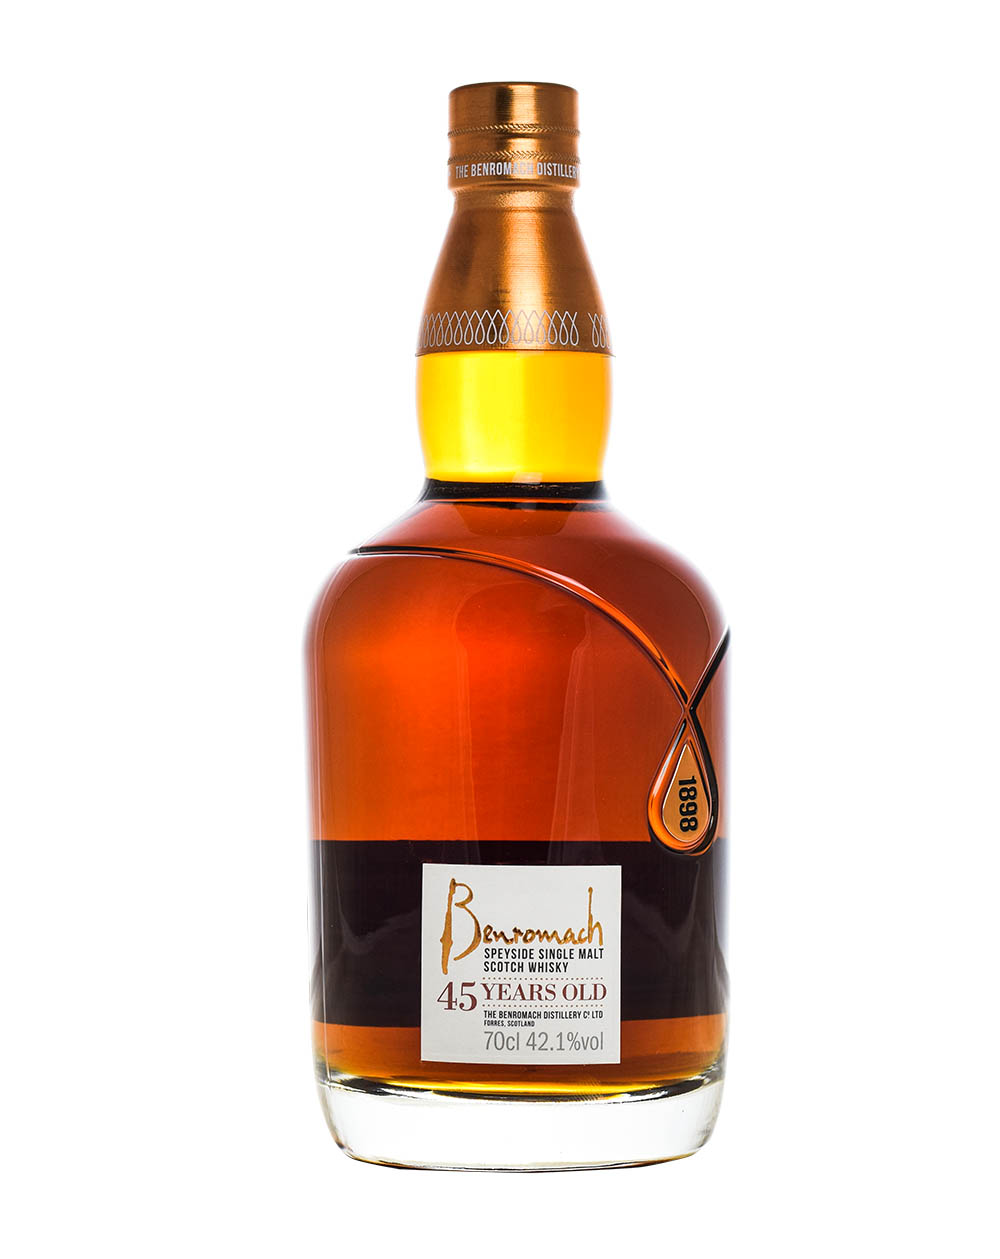 Benromach 45 Yeras Old Musthave Malts